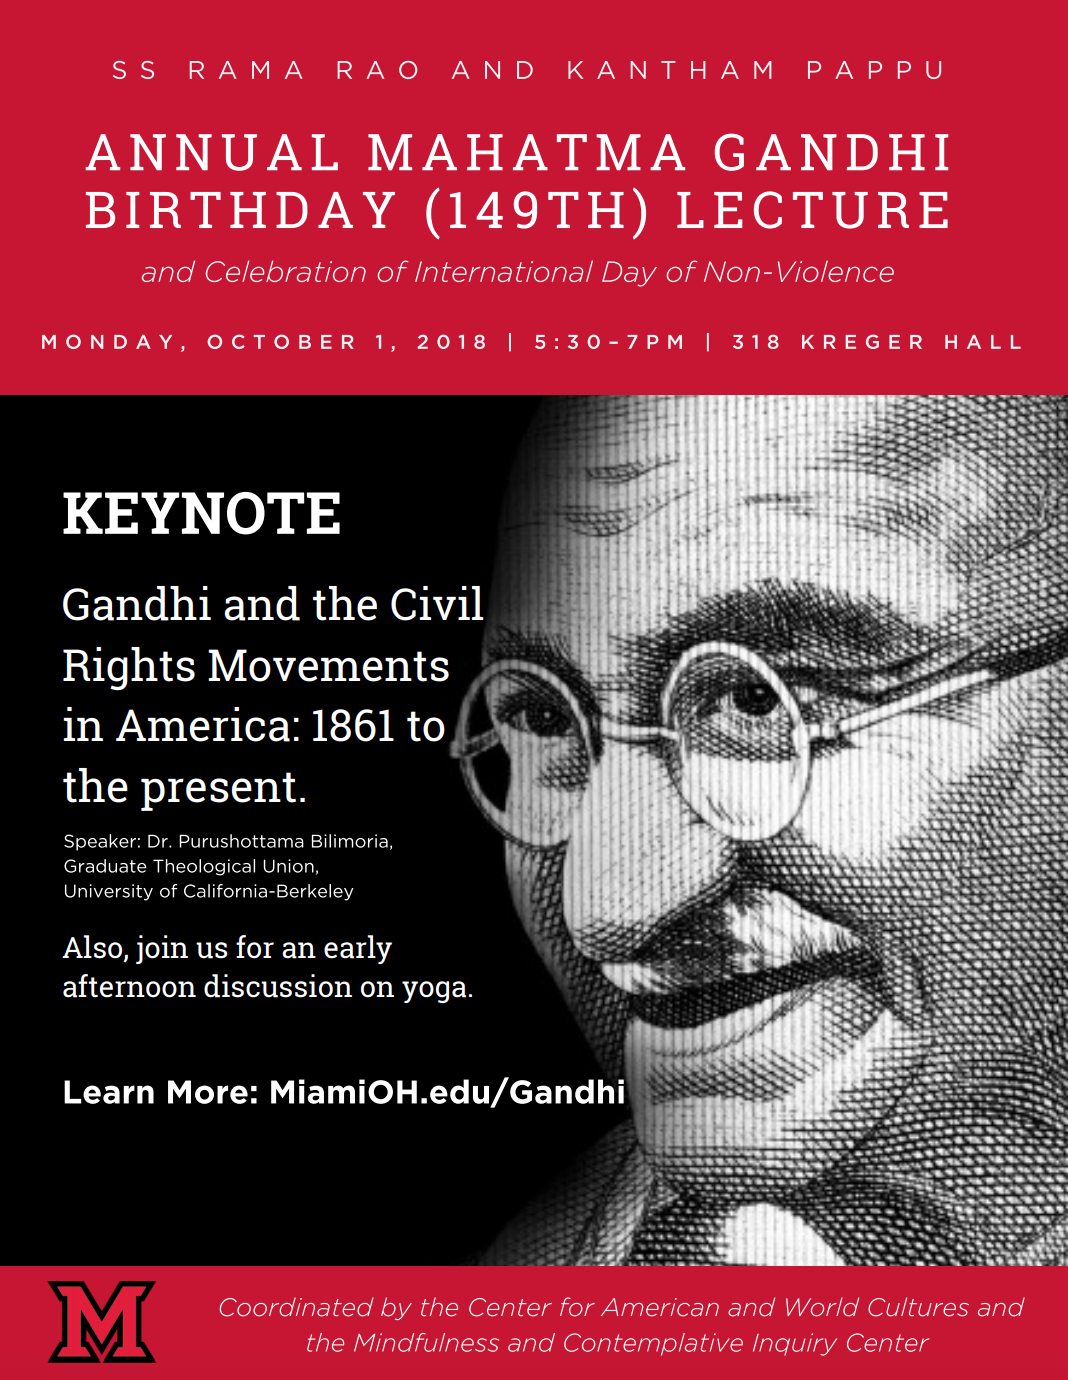 SS Rama Rao and Kanthan Pappu. Annual Mahatma Gandhi Birthday (149th) Lecture and celebration of international day of non-violence Monday, October 1, 2018 | 5:30-7pm | 318 Kreger Hall. Keynote Gandhi and the Civil Rights Movements in America: 1861 to the present. Speaker Dr. Purushottama Bilimoria, Graduate Theological Union, University of California-Berkeley. Also, join us for an early afternoon discussion on yoga. Learn more: MiamiOH.edu/Gandhi. Coordinated by the Center for American and World Cultures and the Mindfulness and Contemplative Inquiry Center